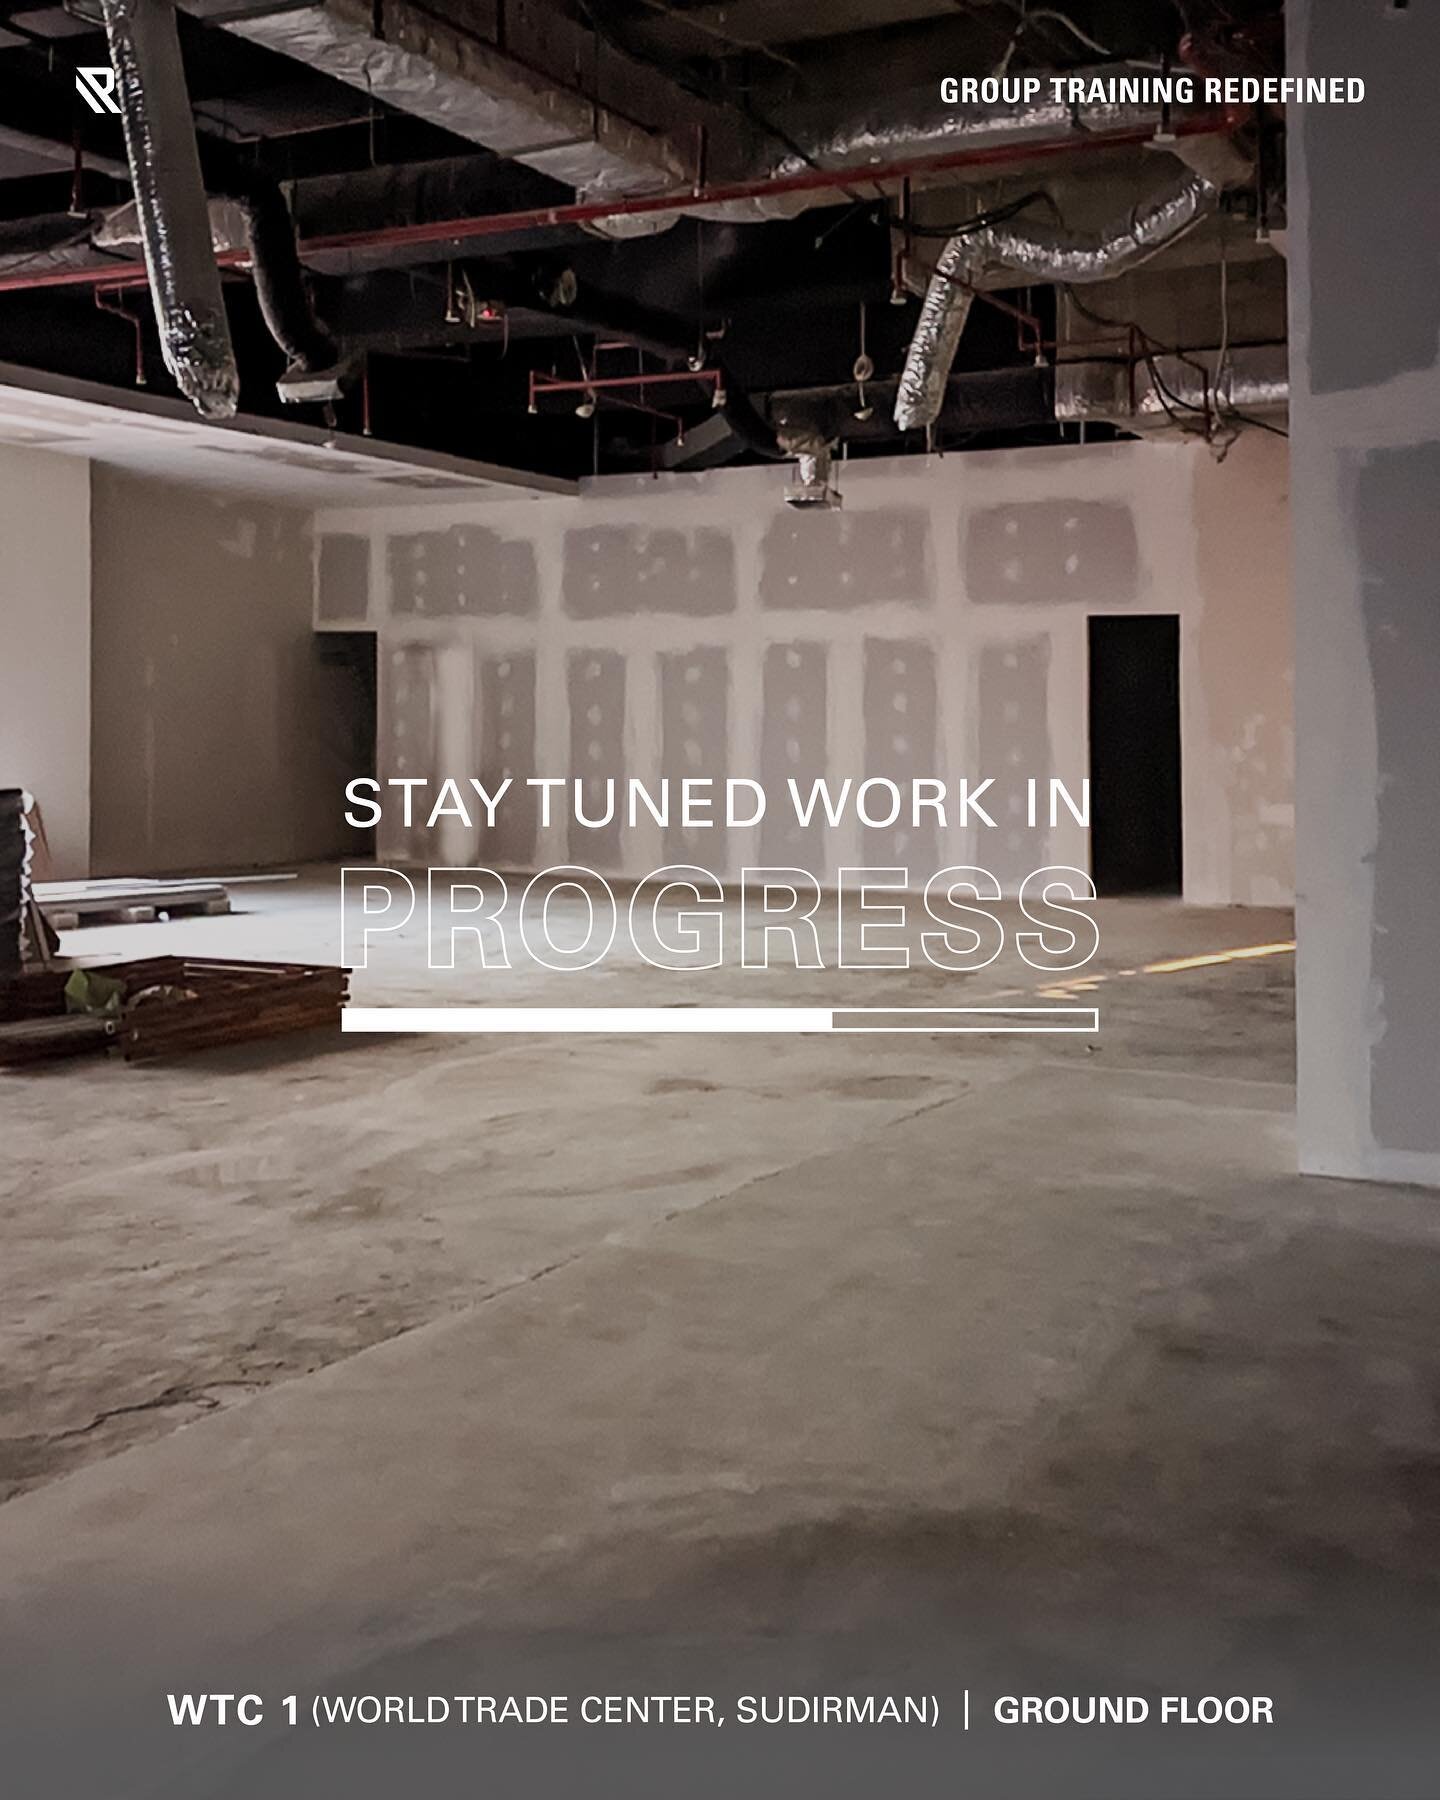 Here's a sneak peek of our future home at WTC 1 (World Trade Center, Sudirman) Ground Floor. We hope to serve you the most efficient group training experience at our new space.

Stay tuned for more information about the grand opening dates.

In the m